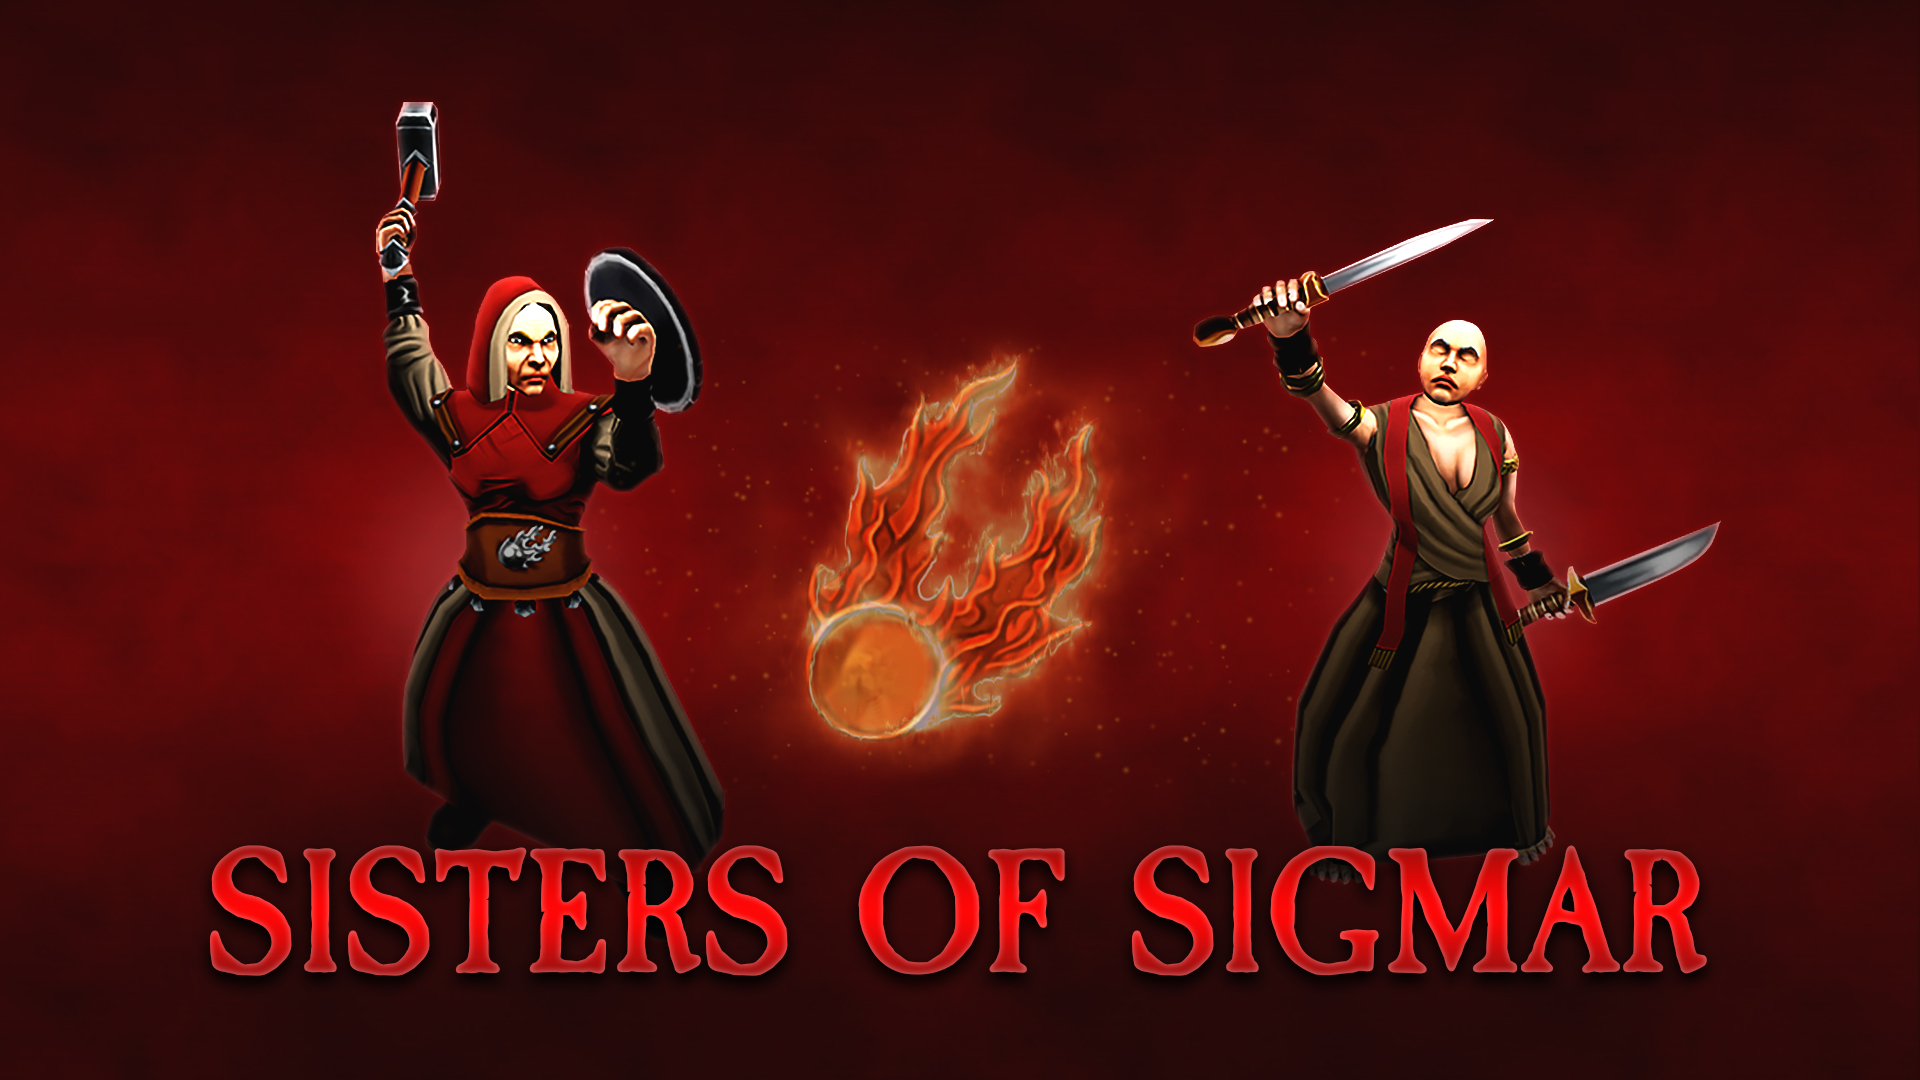 The Sisters of Sigmar